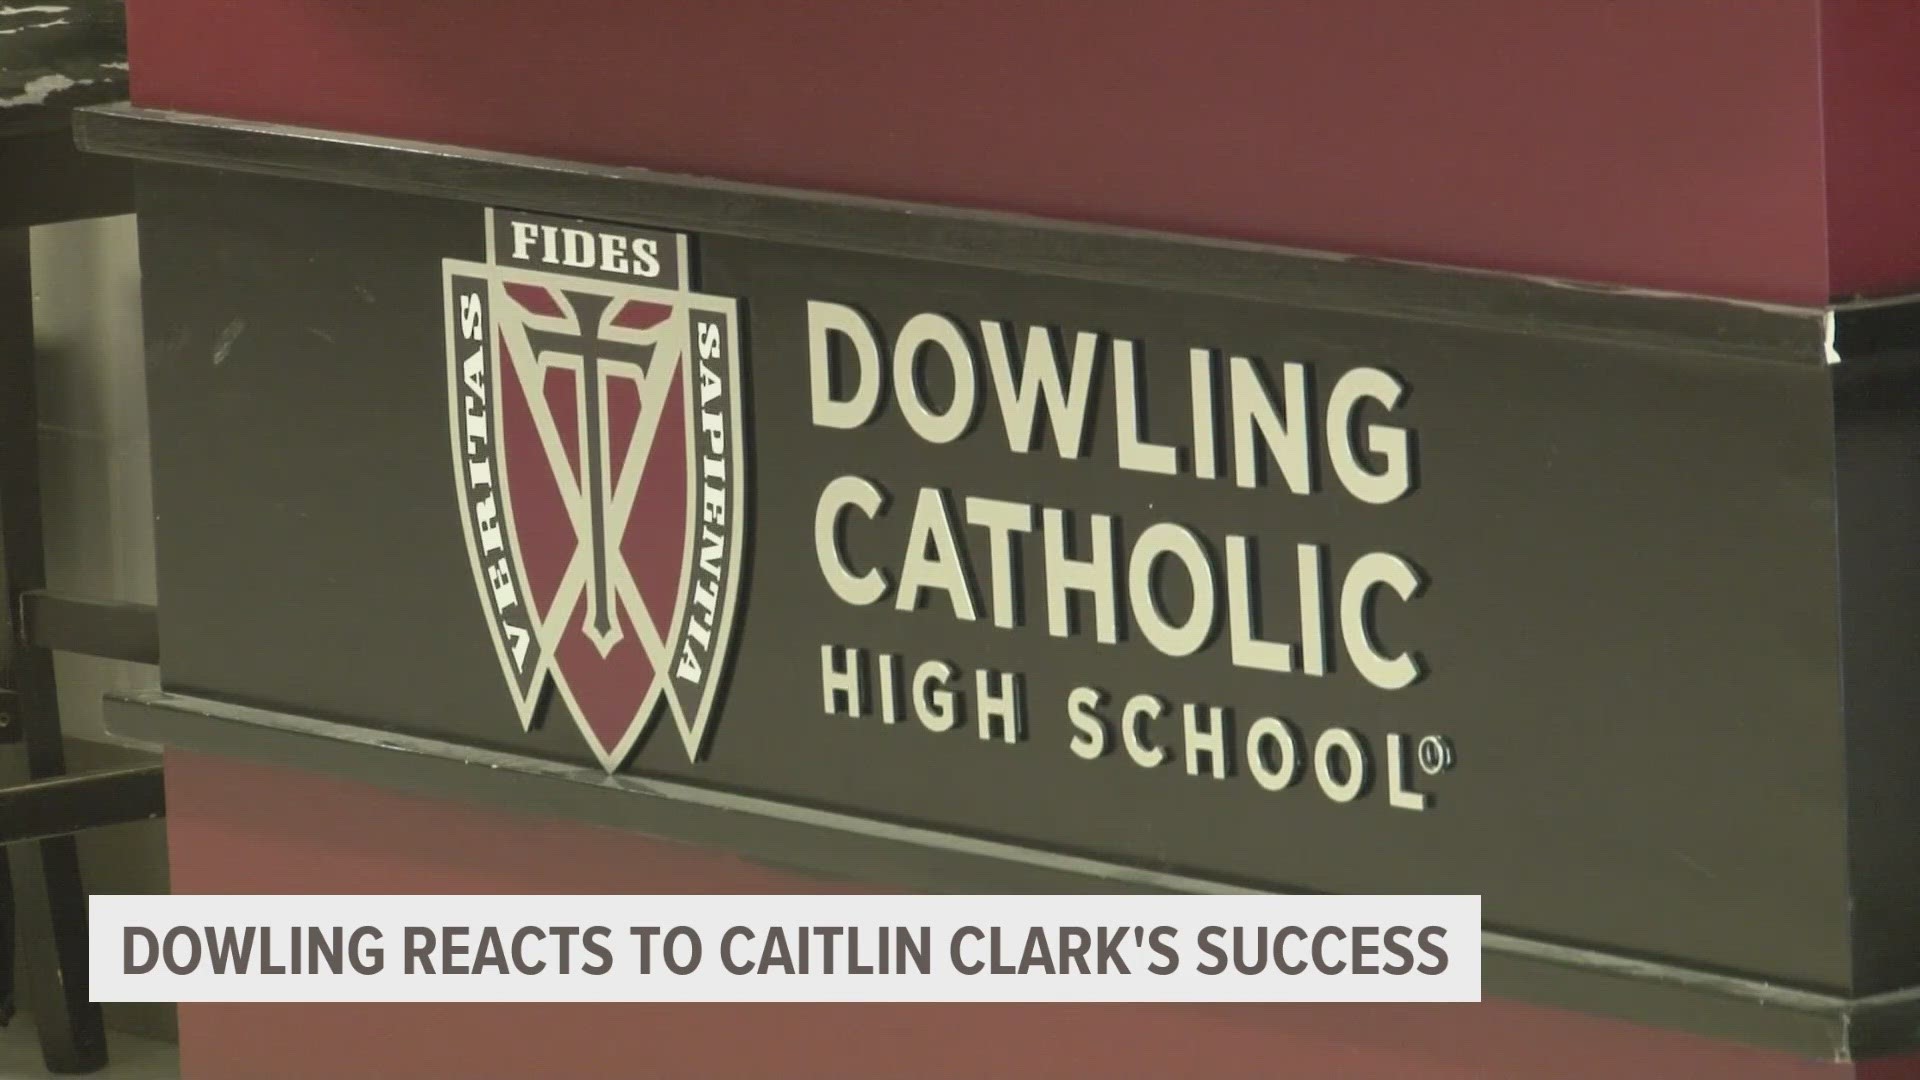 Clark's college success has translated to success for Dowling Catholic as well, boosting visibility for the women's game at all levels.